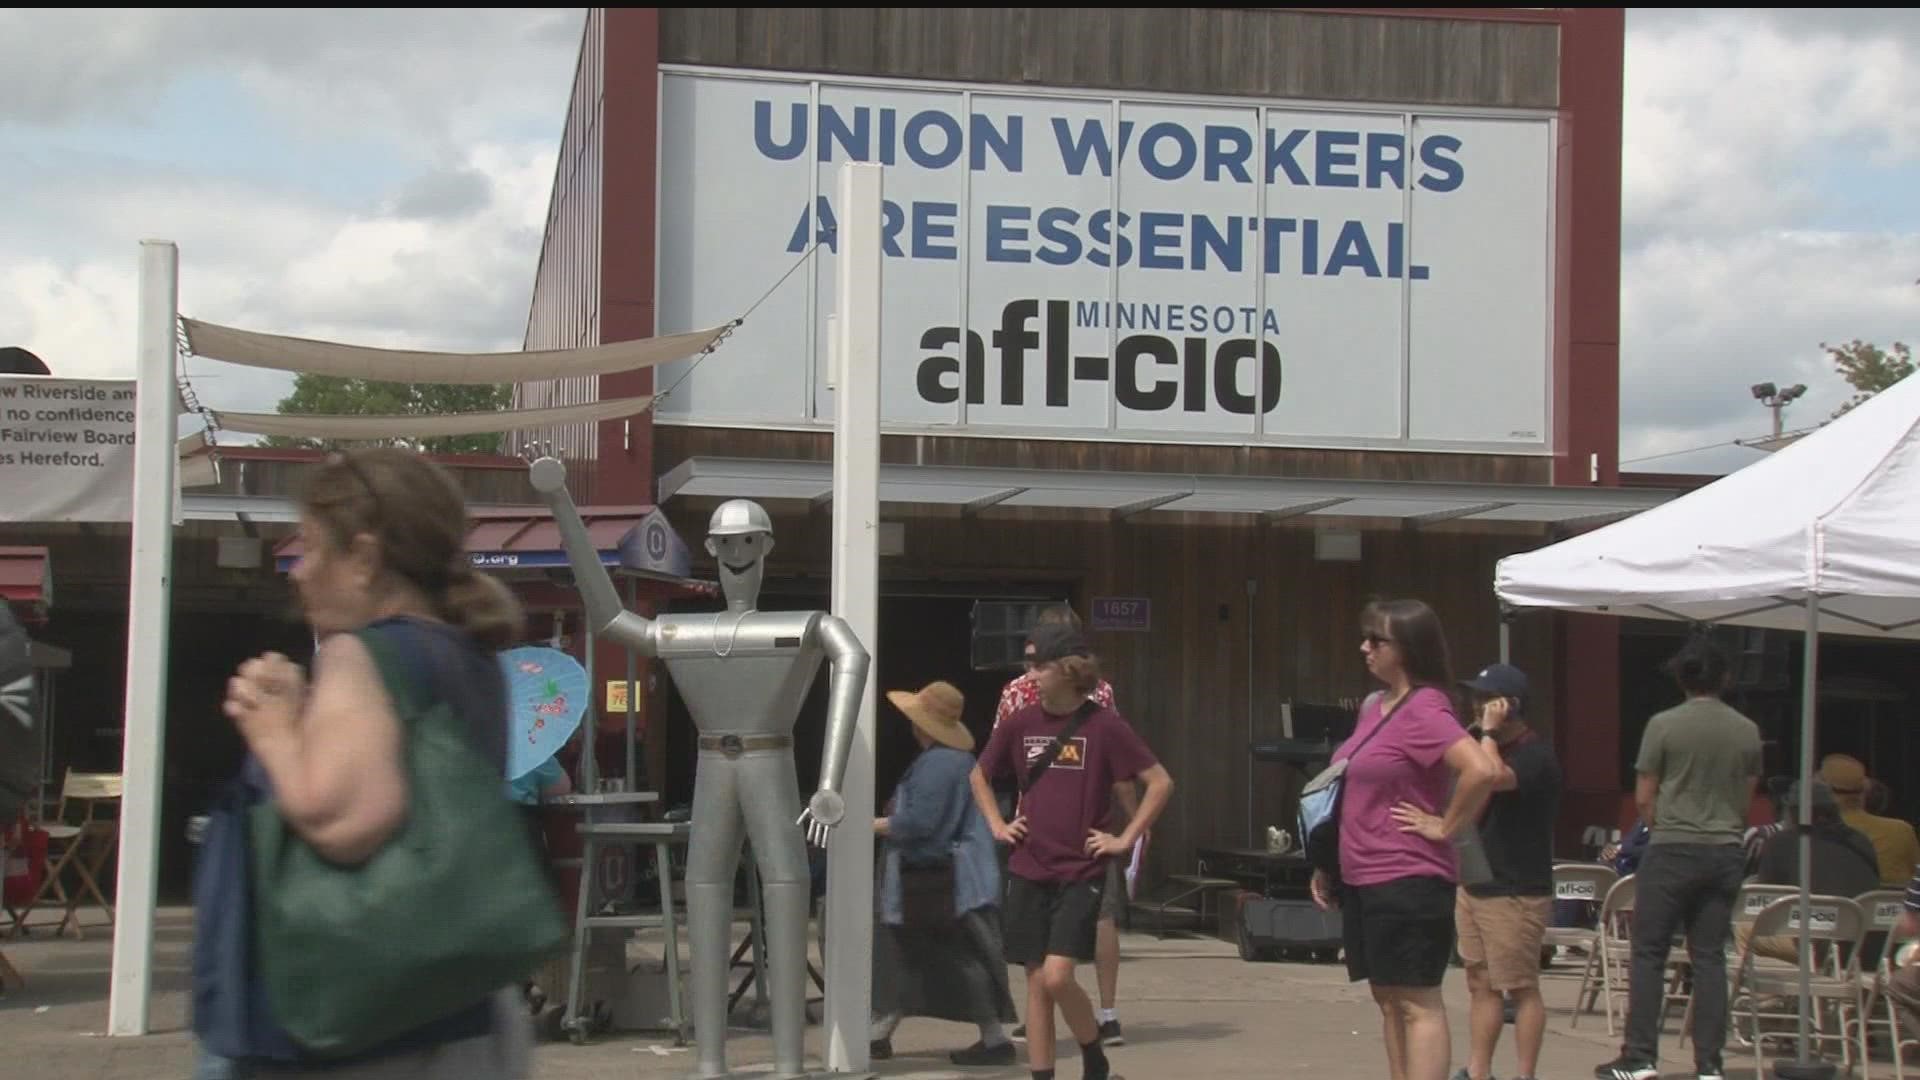 The labor movement vibe at the State Fair was fairly upbeat on Labor Day 2022, as the guys at the Laborer's International stand said they're feeling some momentum.